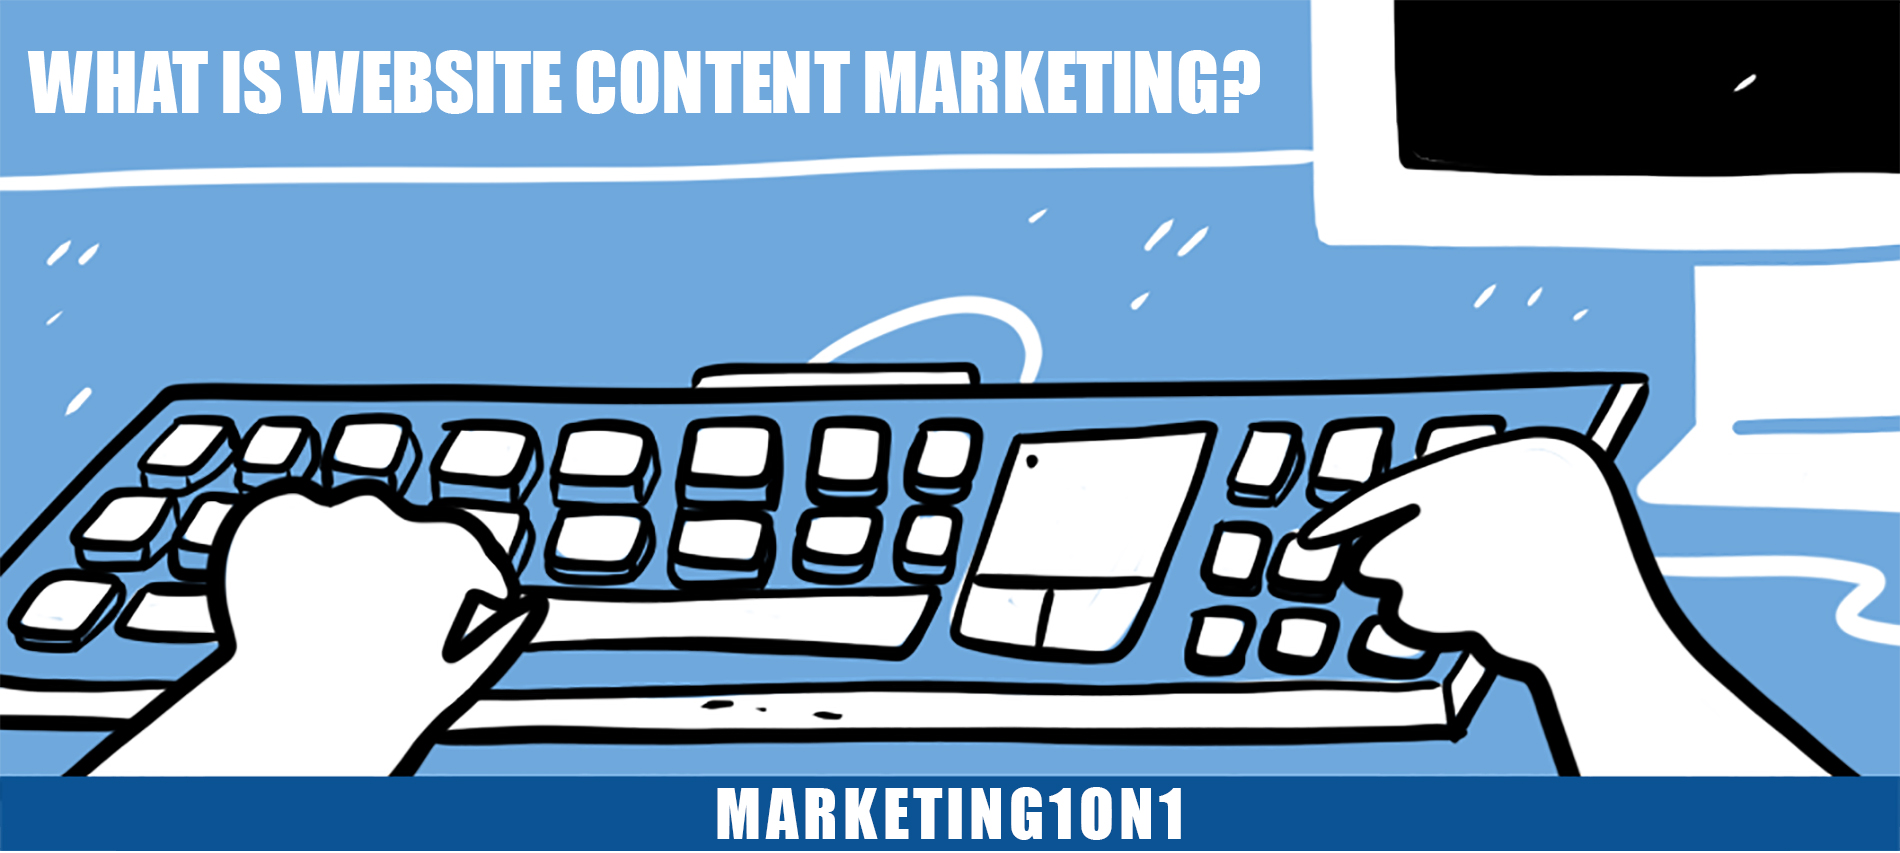 What is website content marketing?